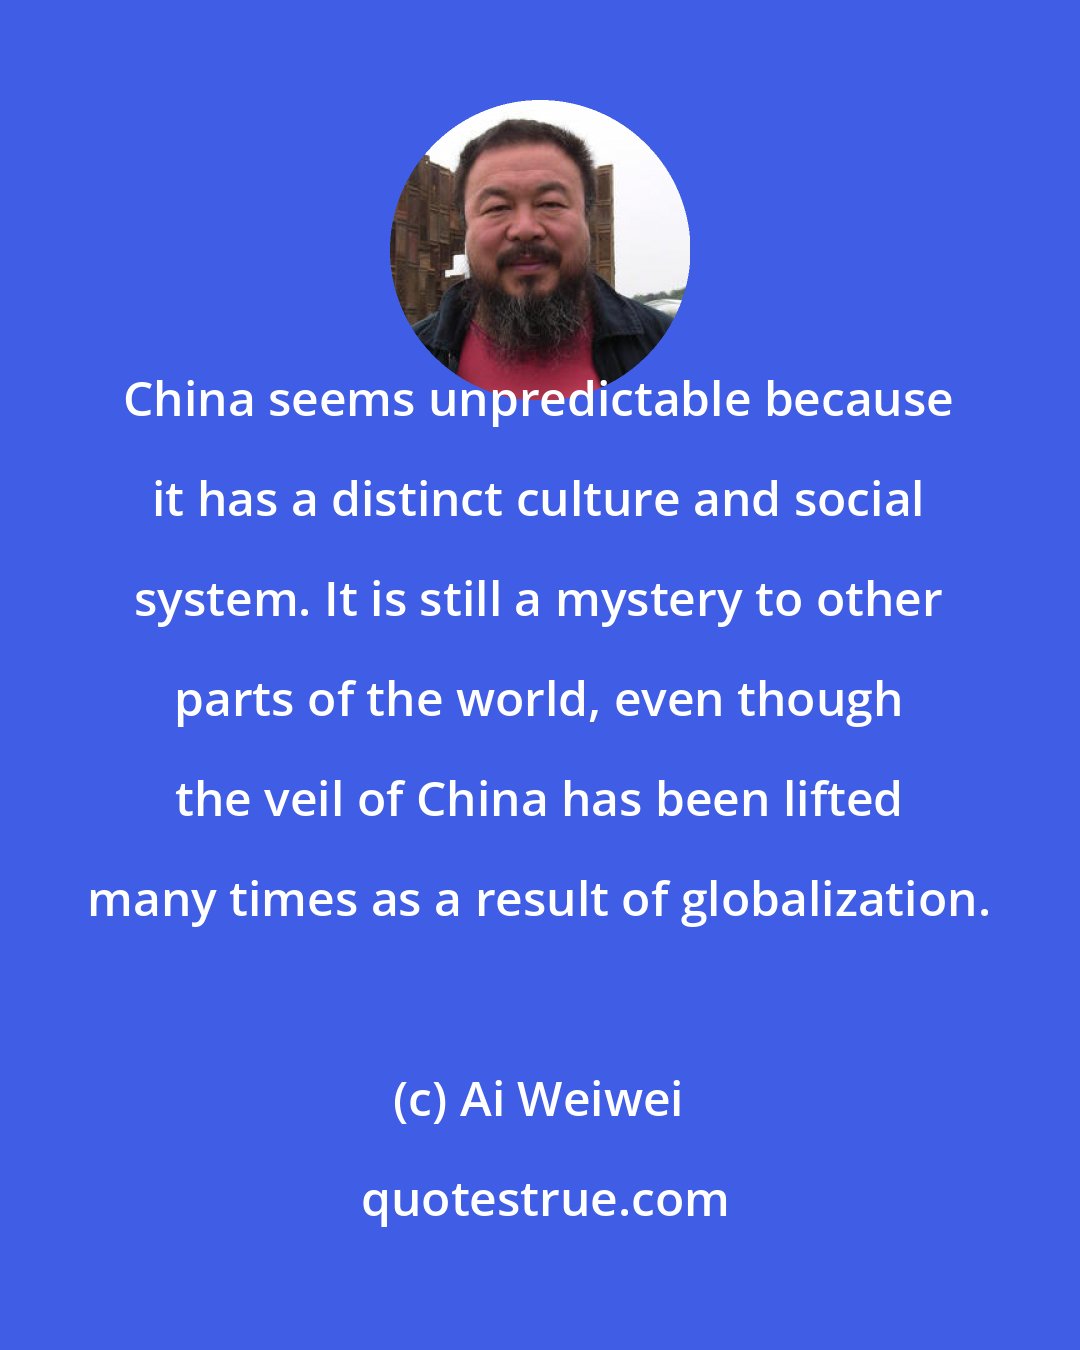 Ai Weiwei: China seems unpredictable because it has a distinct culture and social system. It is still a mystery to other parts of the world, even though the veil of China has been lifted many times as a result of globalization.